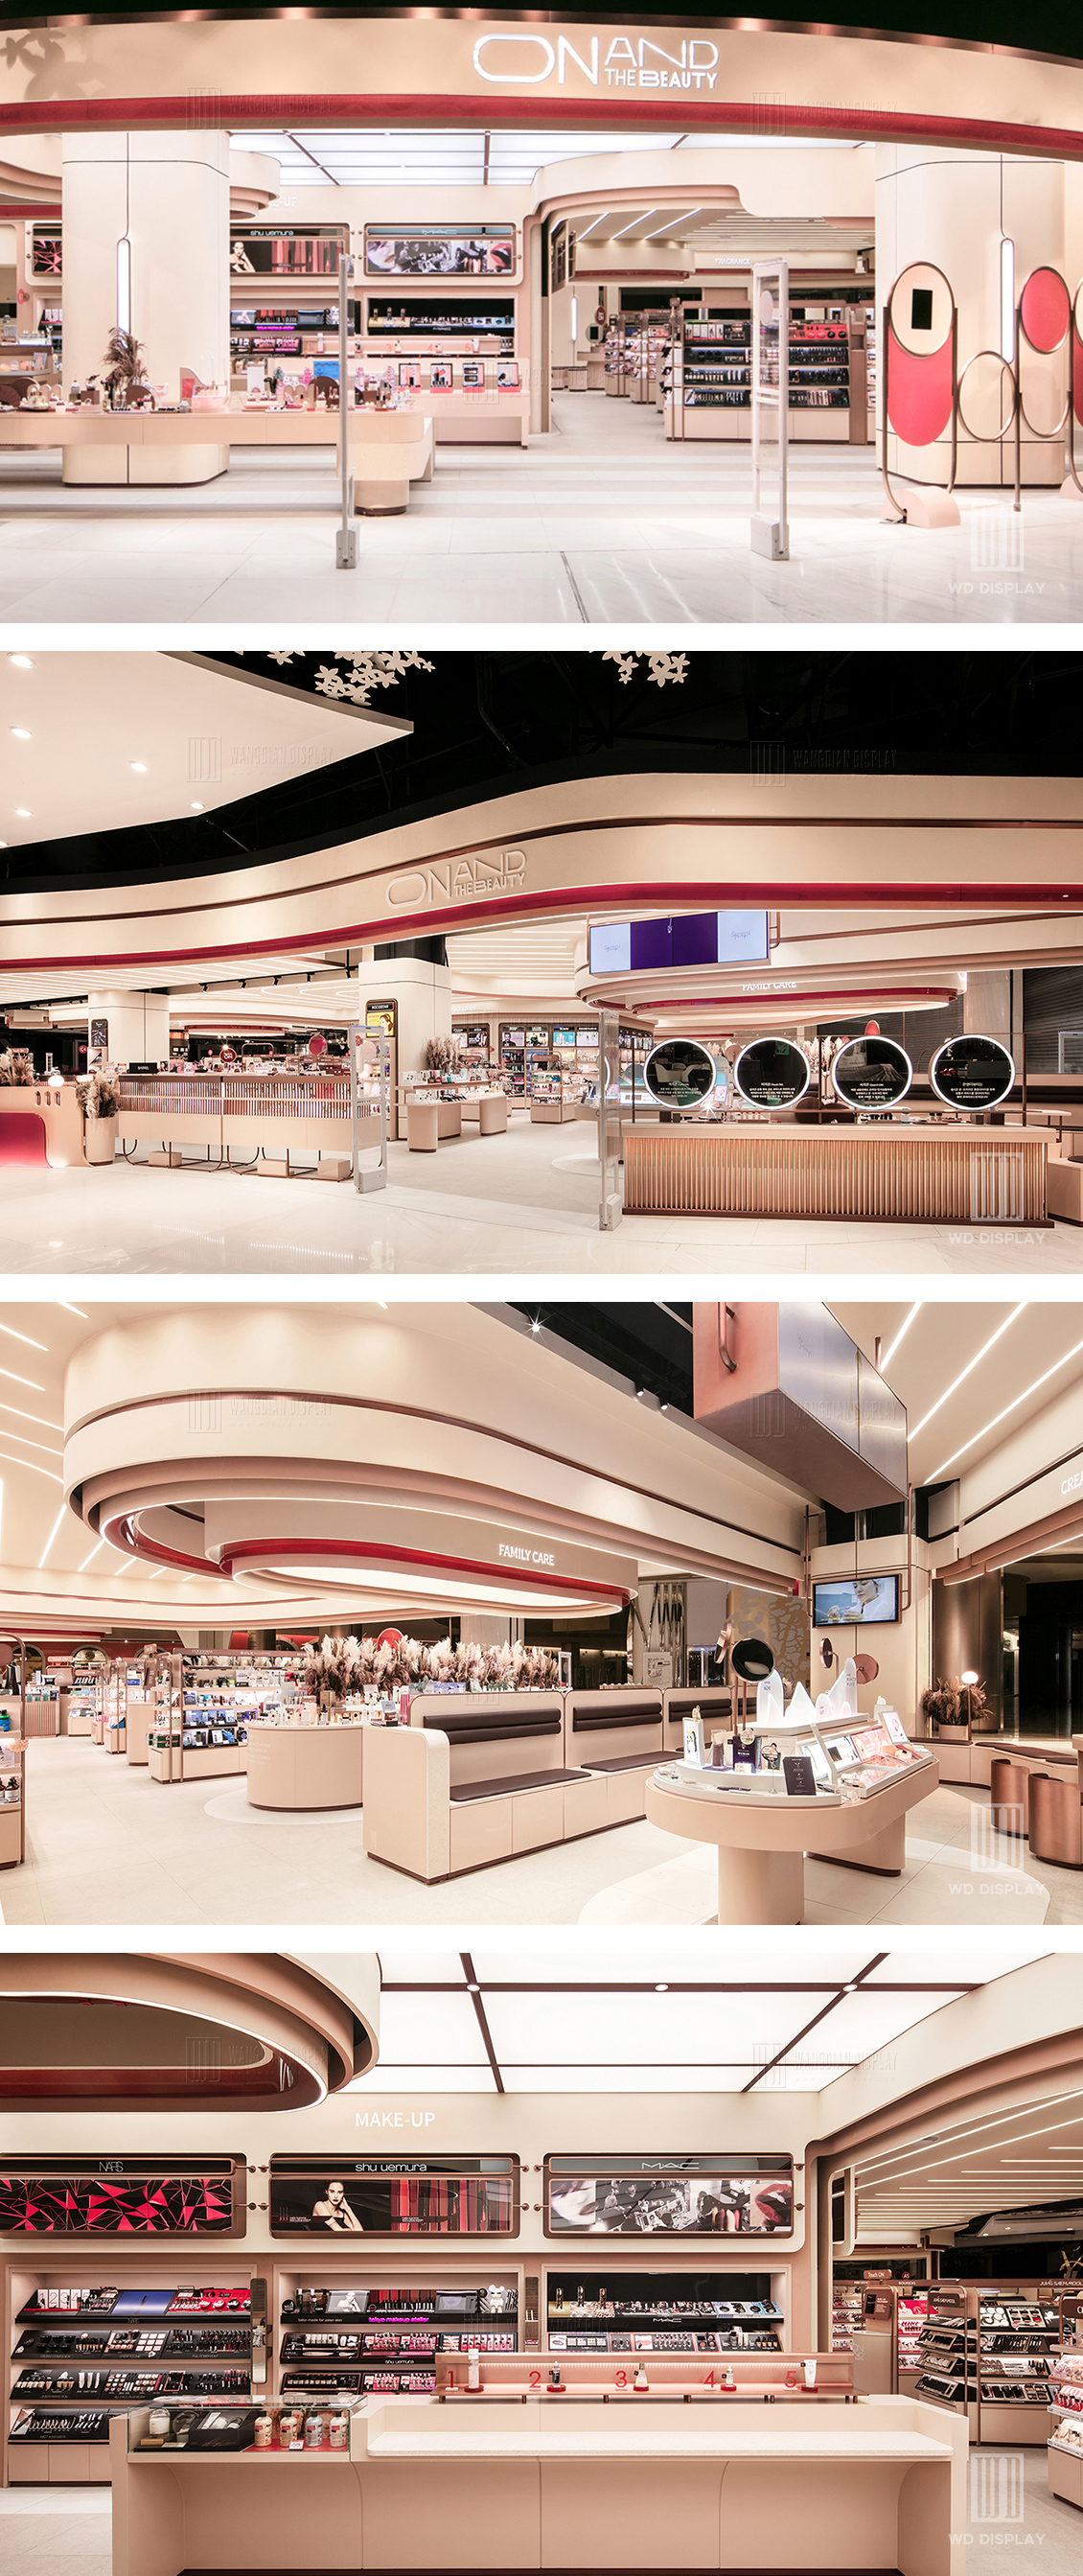 Airport Large-scale makeup duty-free store design